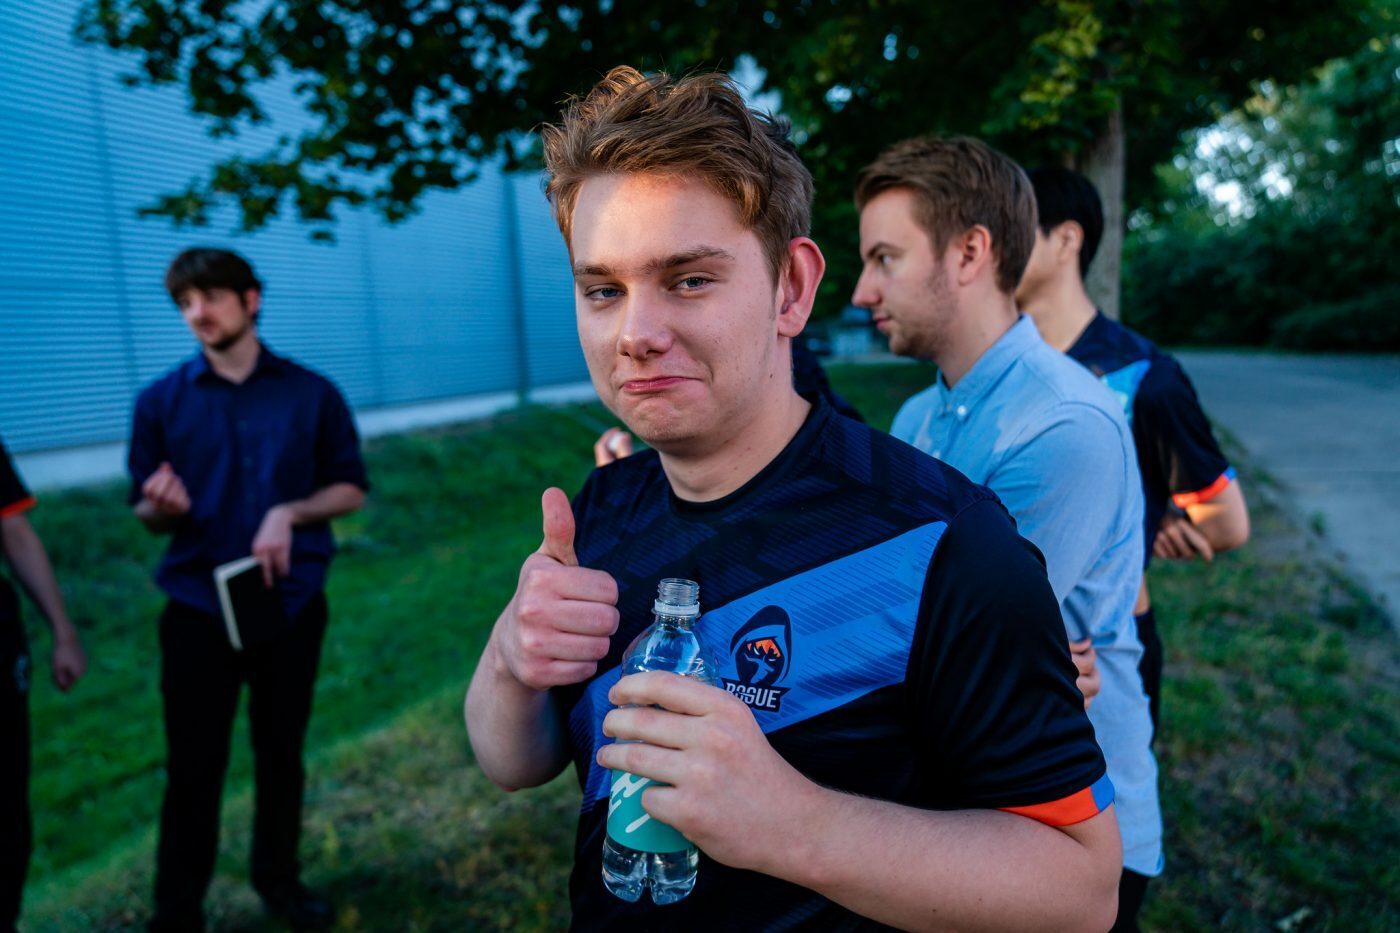 Rogue and FC Schalke 04 advance to the semifinals of the LEC Summer Playoffs. (Image via Riot Games)